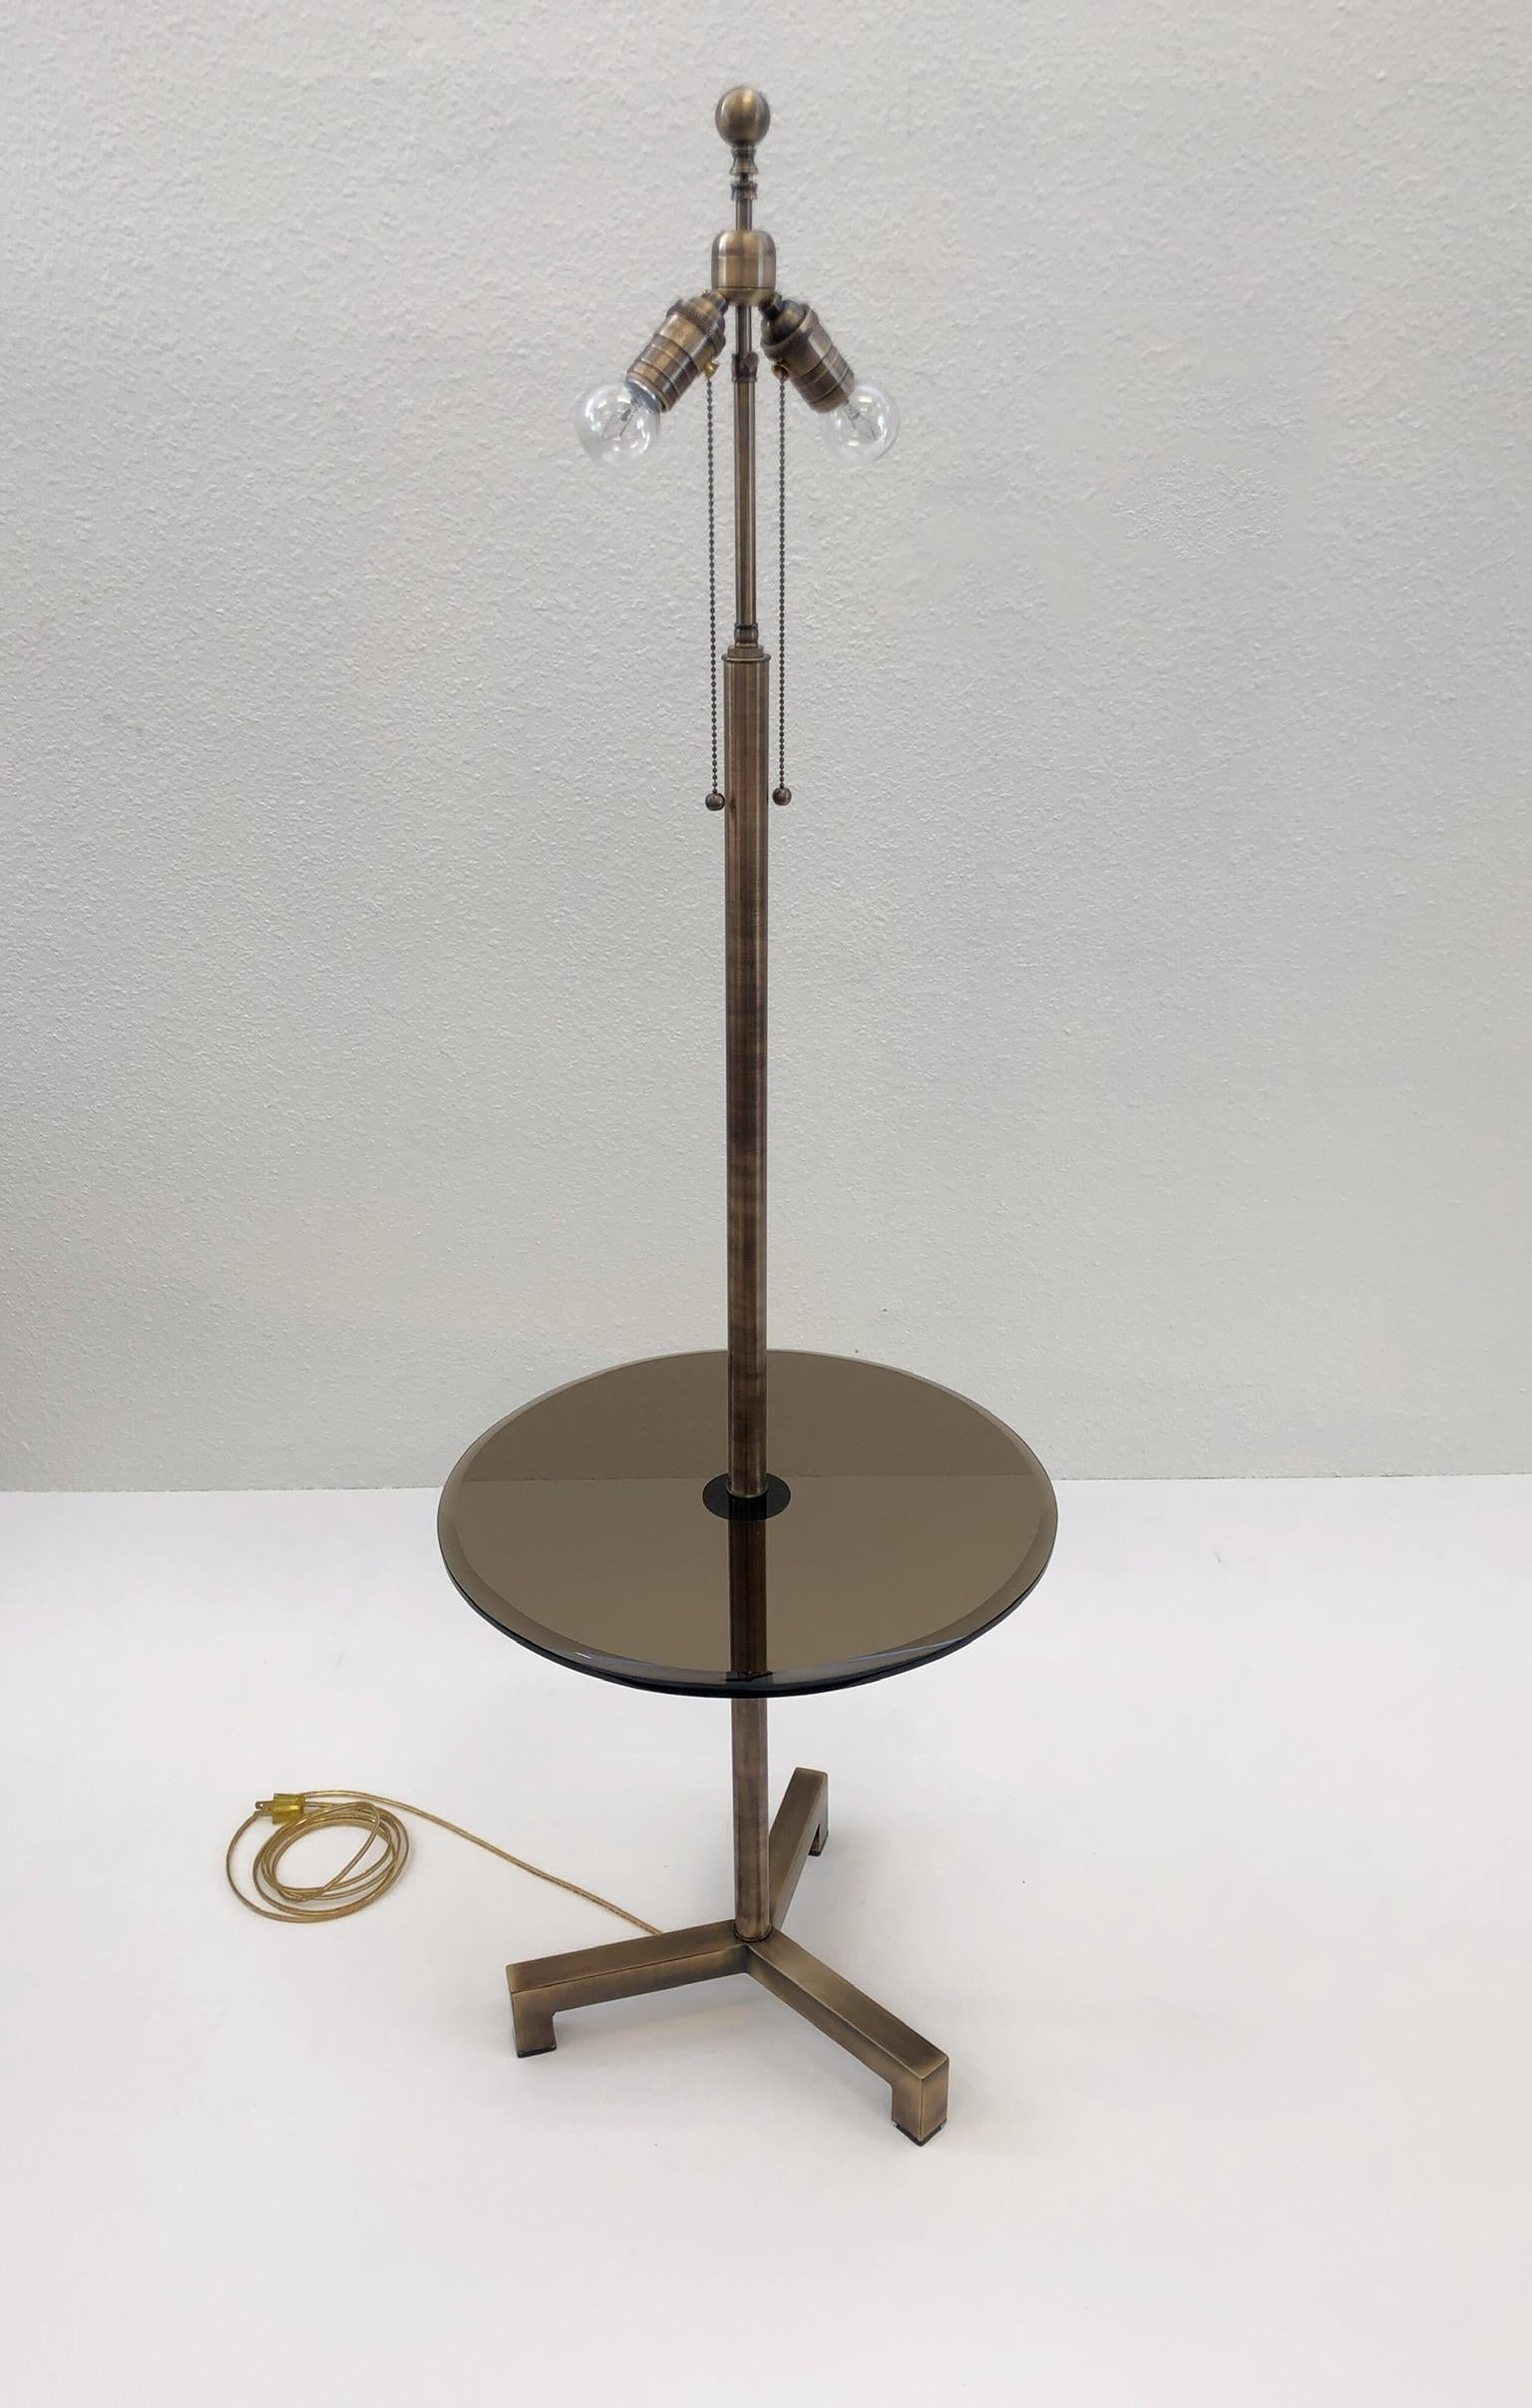 A beautiful antique brass floor lamp with a bronze beveled glass table design by Charles Hollis Jones. According to CHJ he designed this for Arthur Elrod in the 1960s. The lamp has been newly replated, rewired and new Lucite feet.
Dimensions:
The